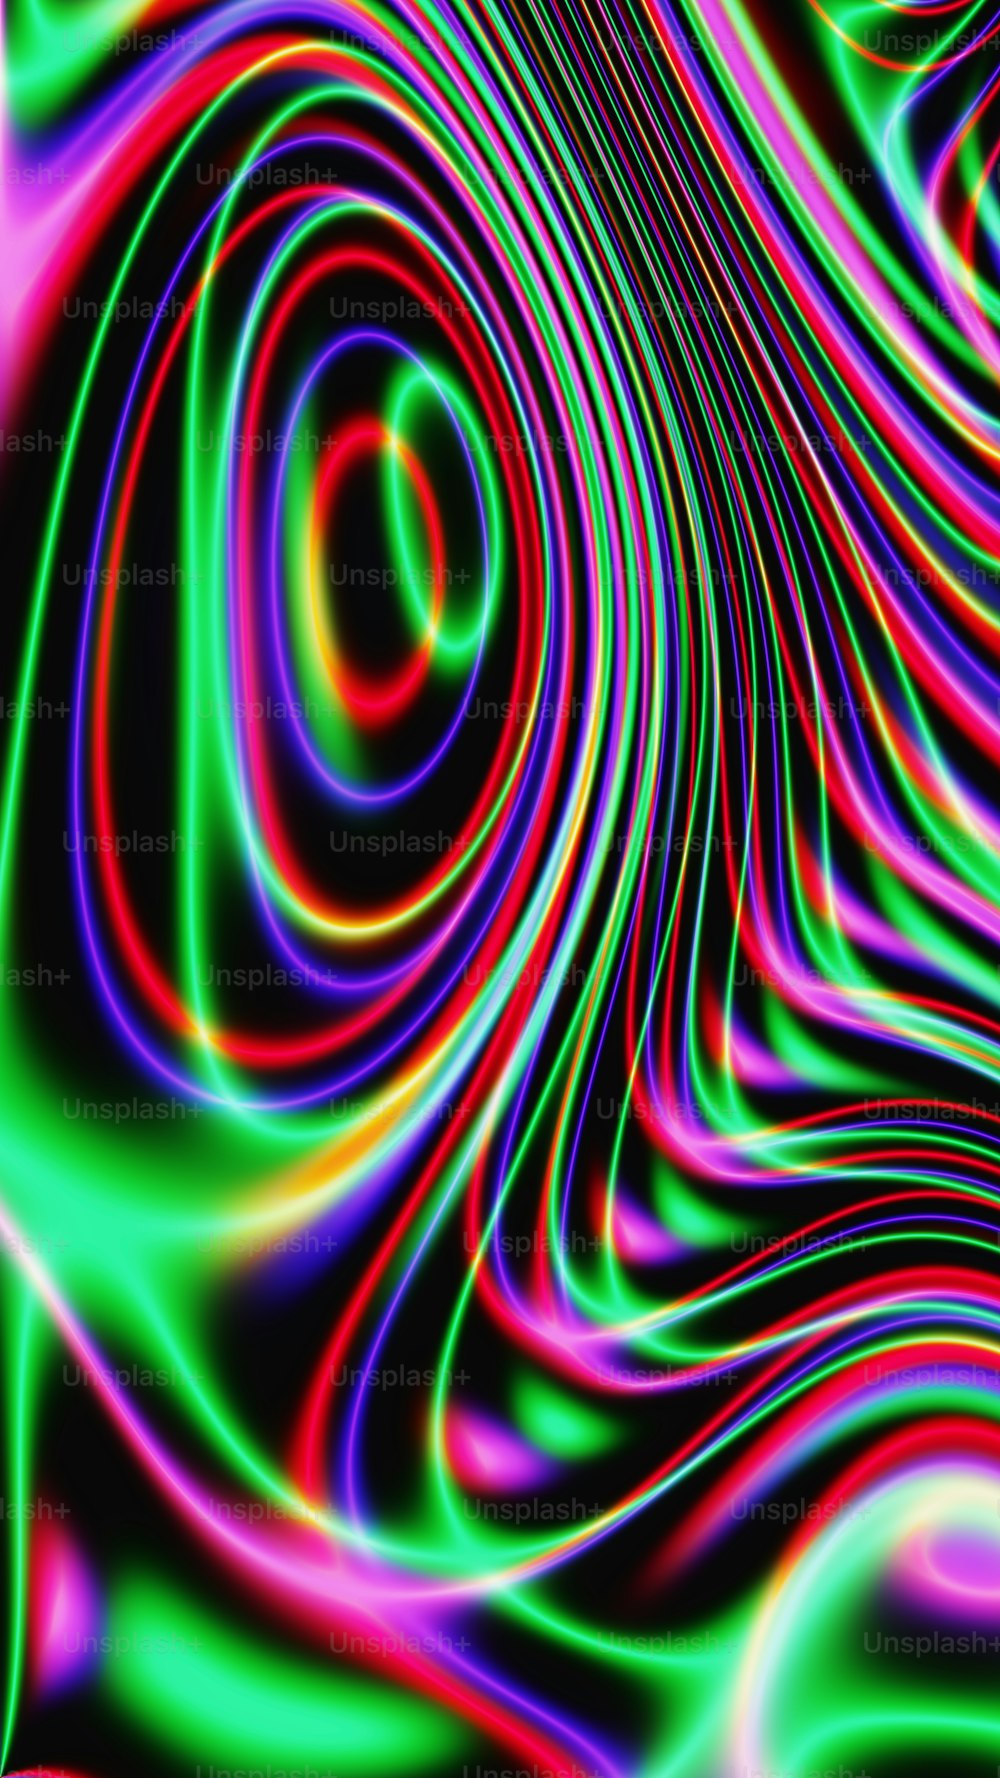 an abstract background with a spiral design